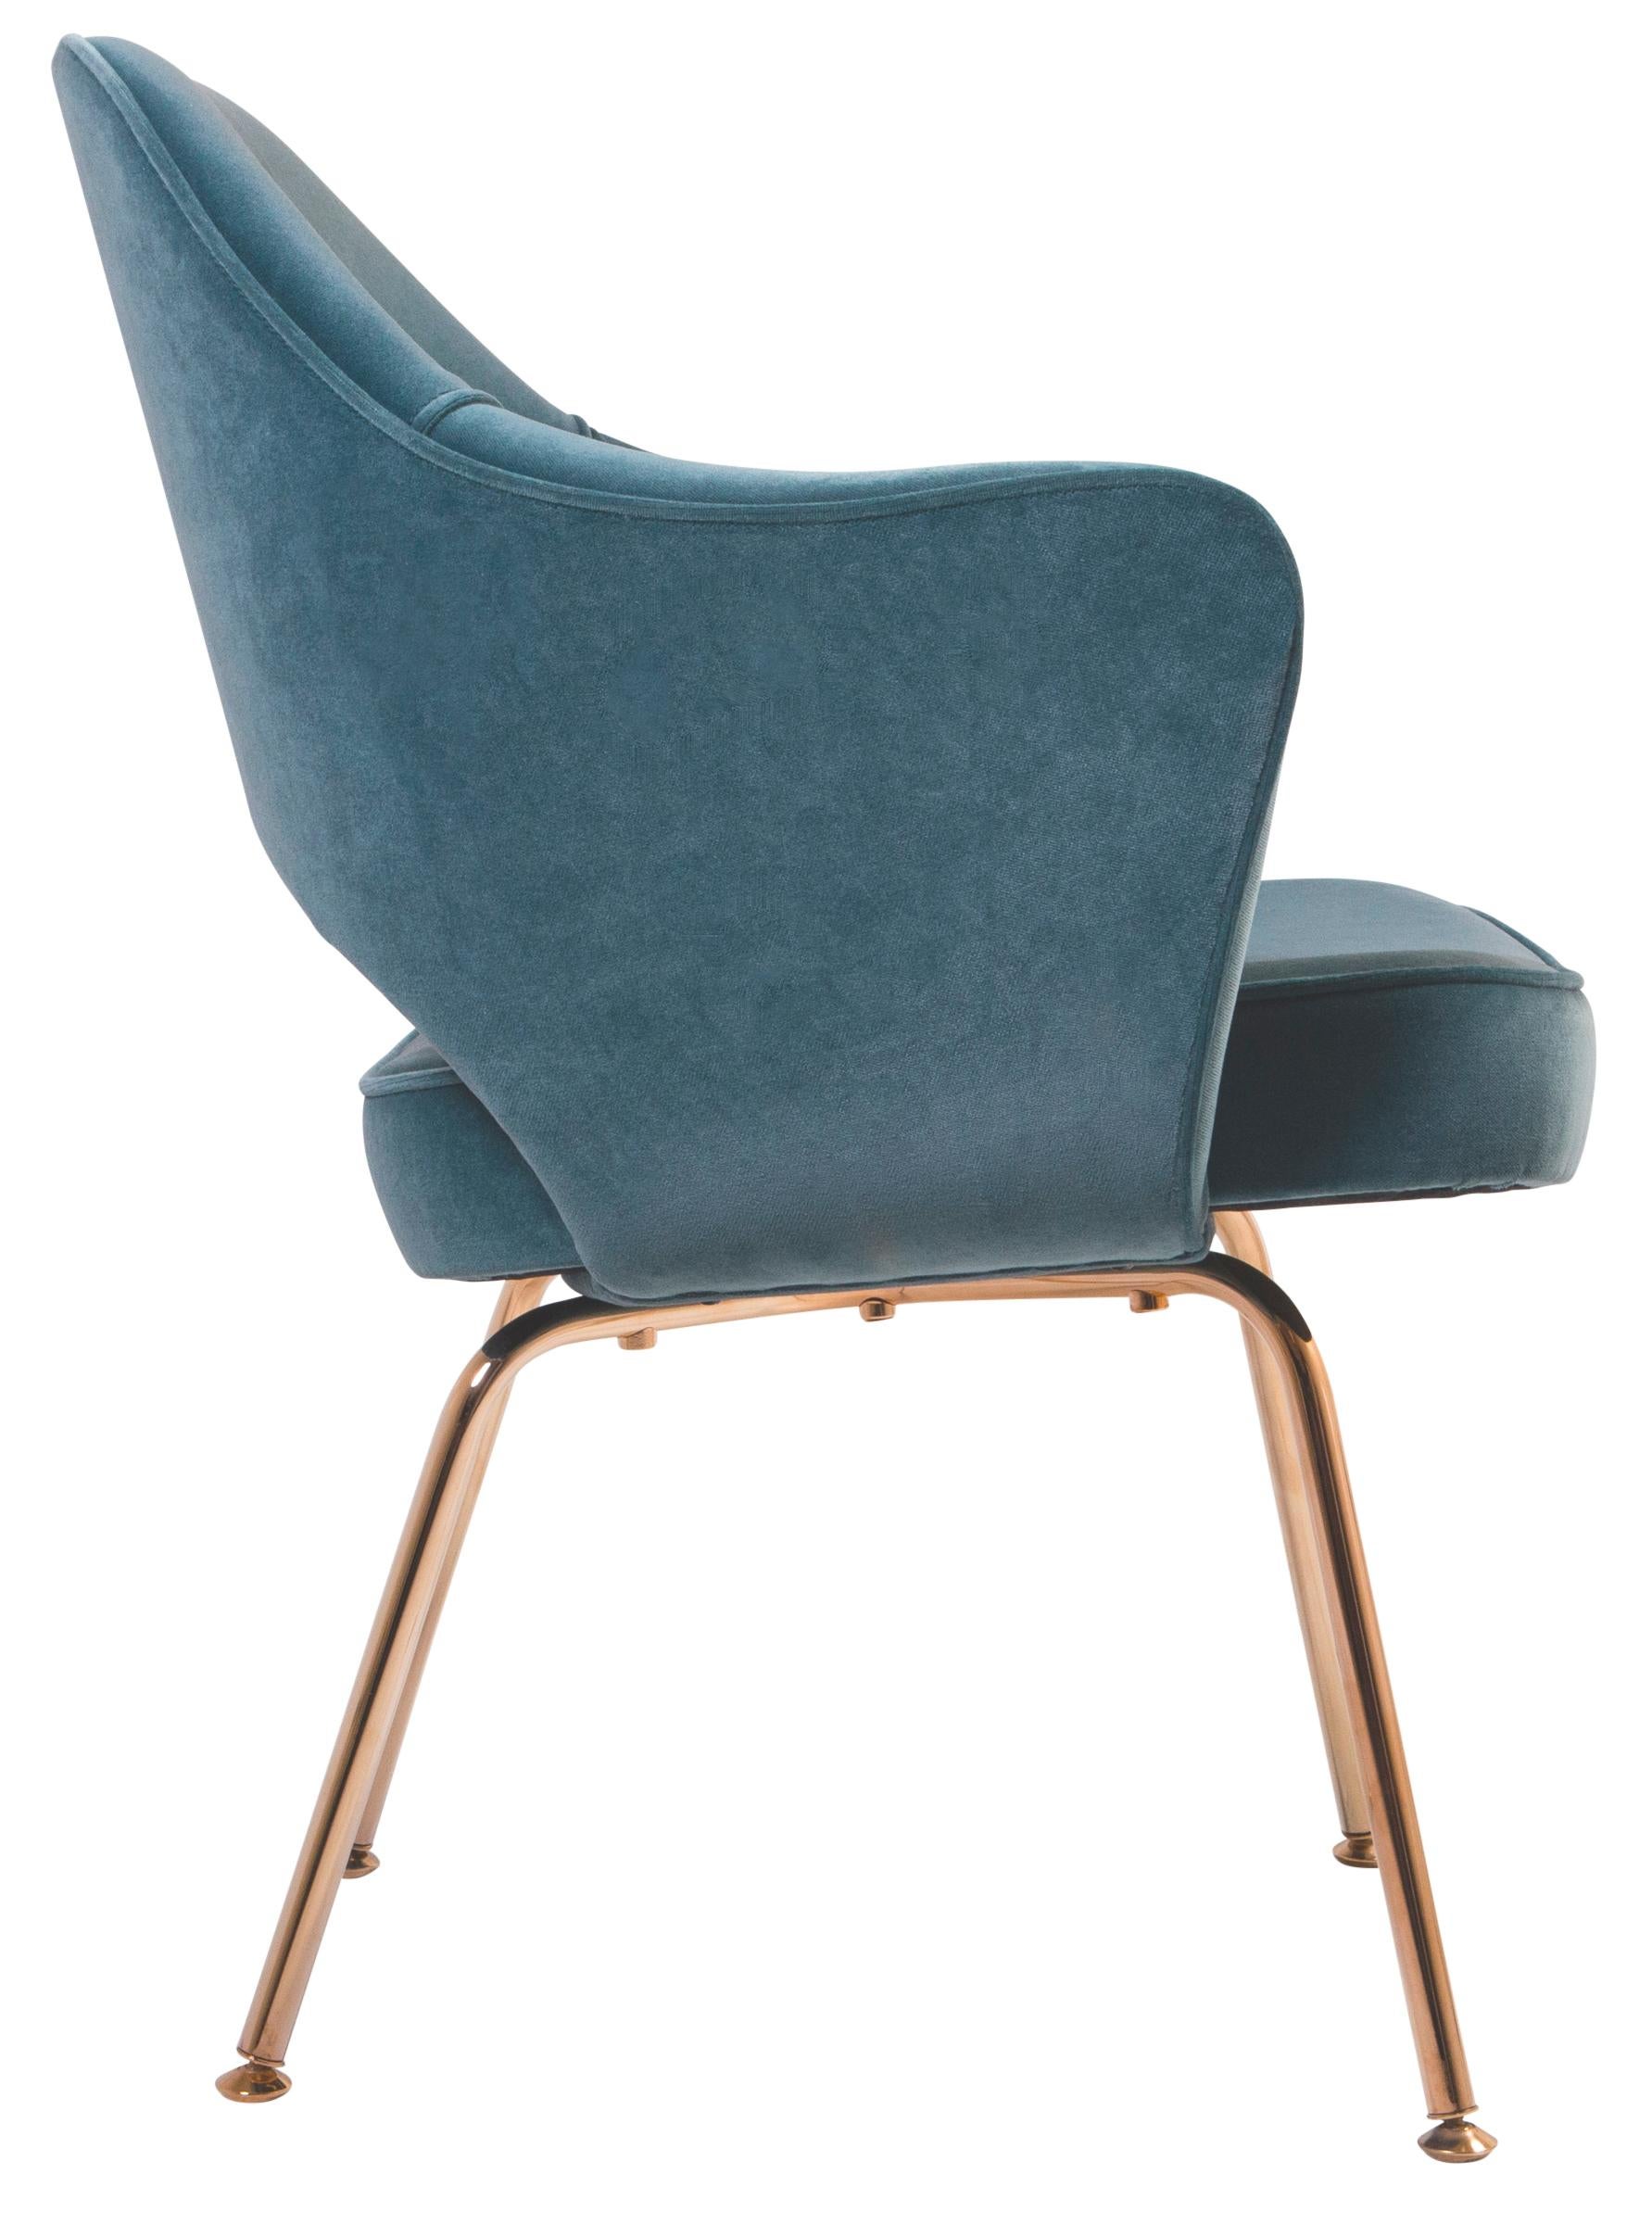 Plated Saarinen Executive Arm Chairs in Pavo Blue Velvet, Gold Edition, Pair For Sale